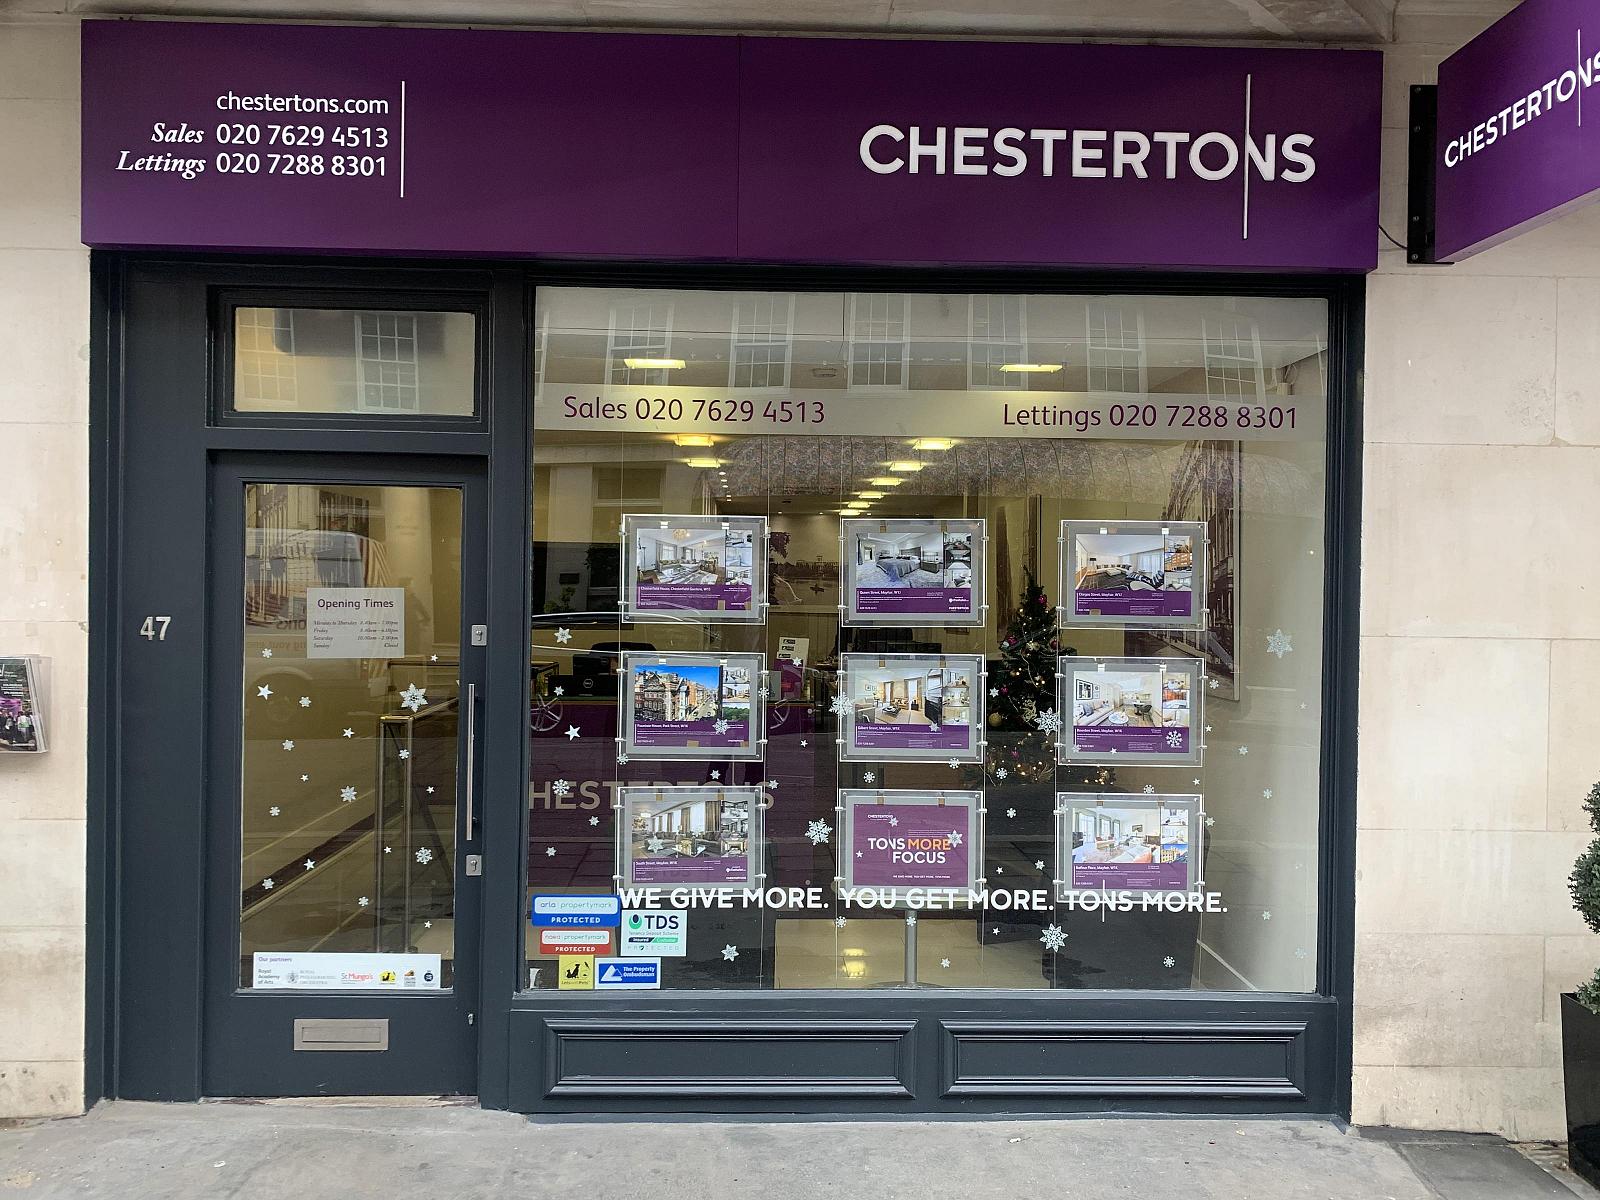 Dexters believed to be in talks to buy Chestertons – Property Industry Eye